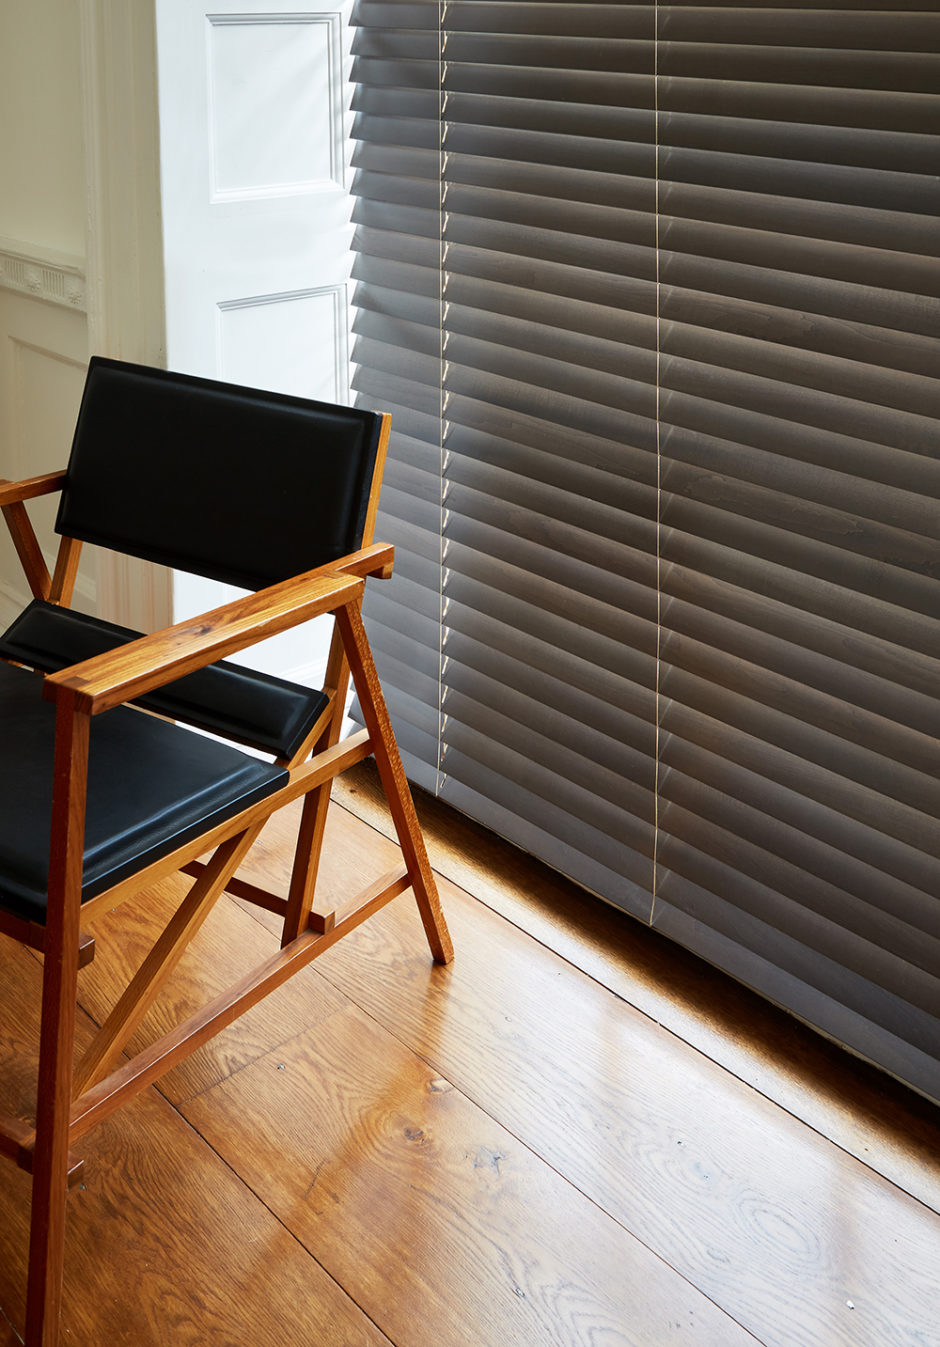 Wooden Blinds For Patio Doors, Can You Put Vertical Blinds On Patio Doors